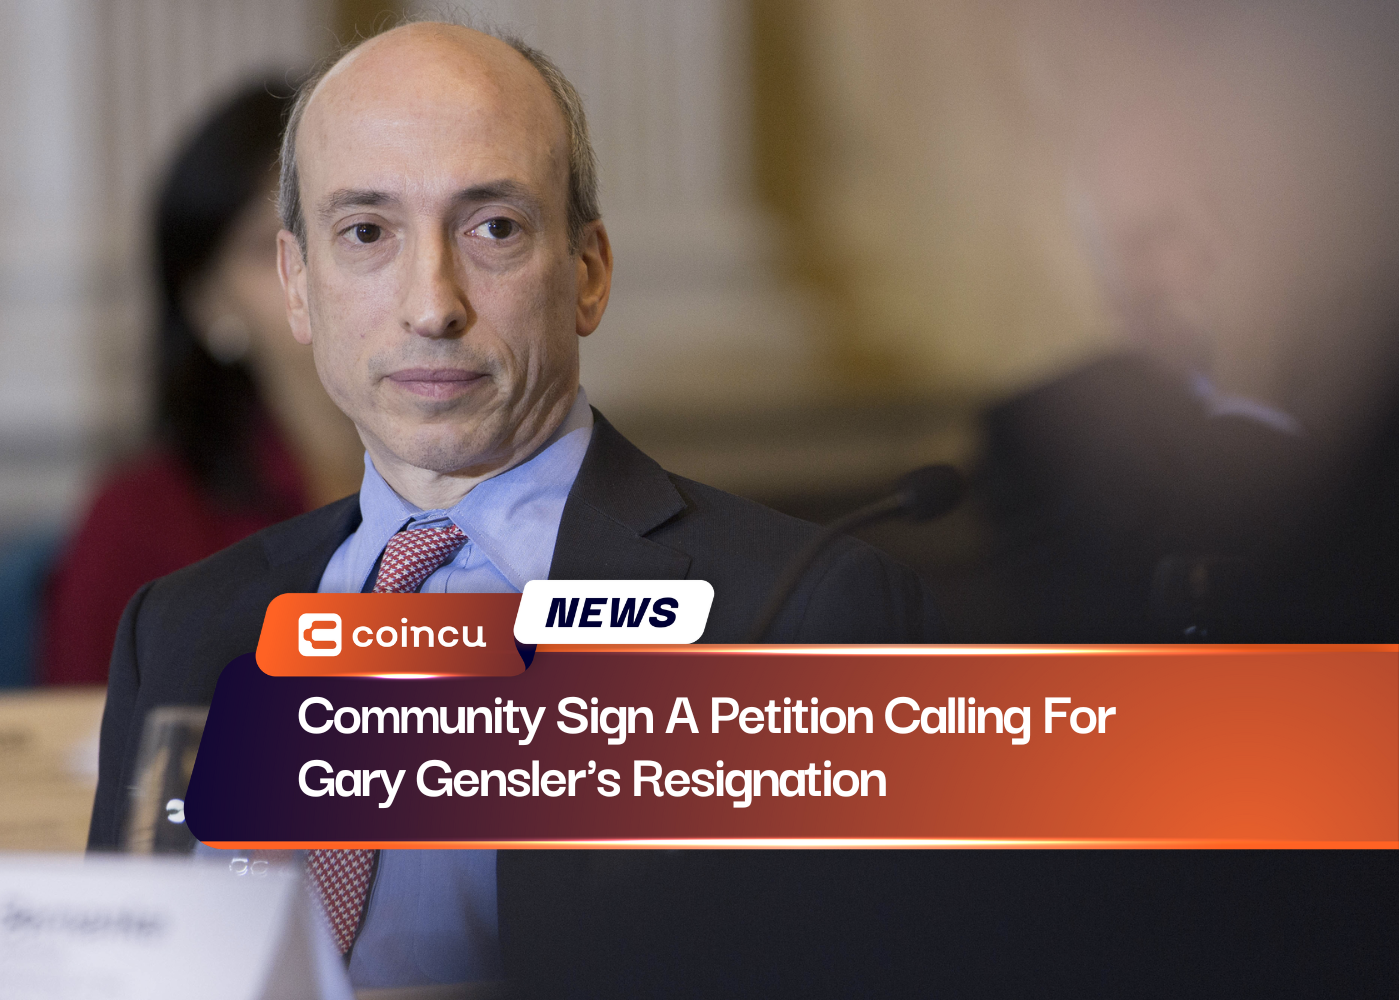 Community Sign A Petition Calling For Gary Gensler's Resignation